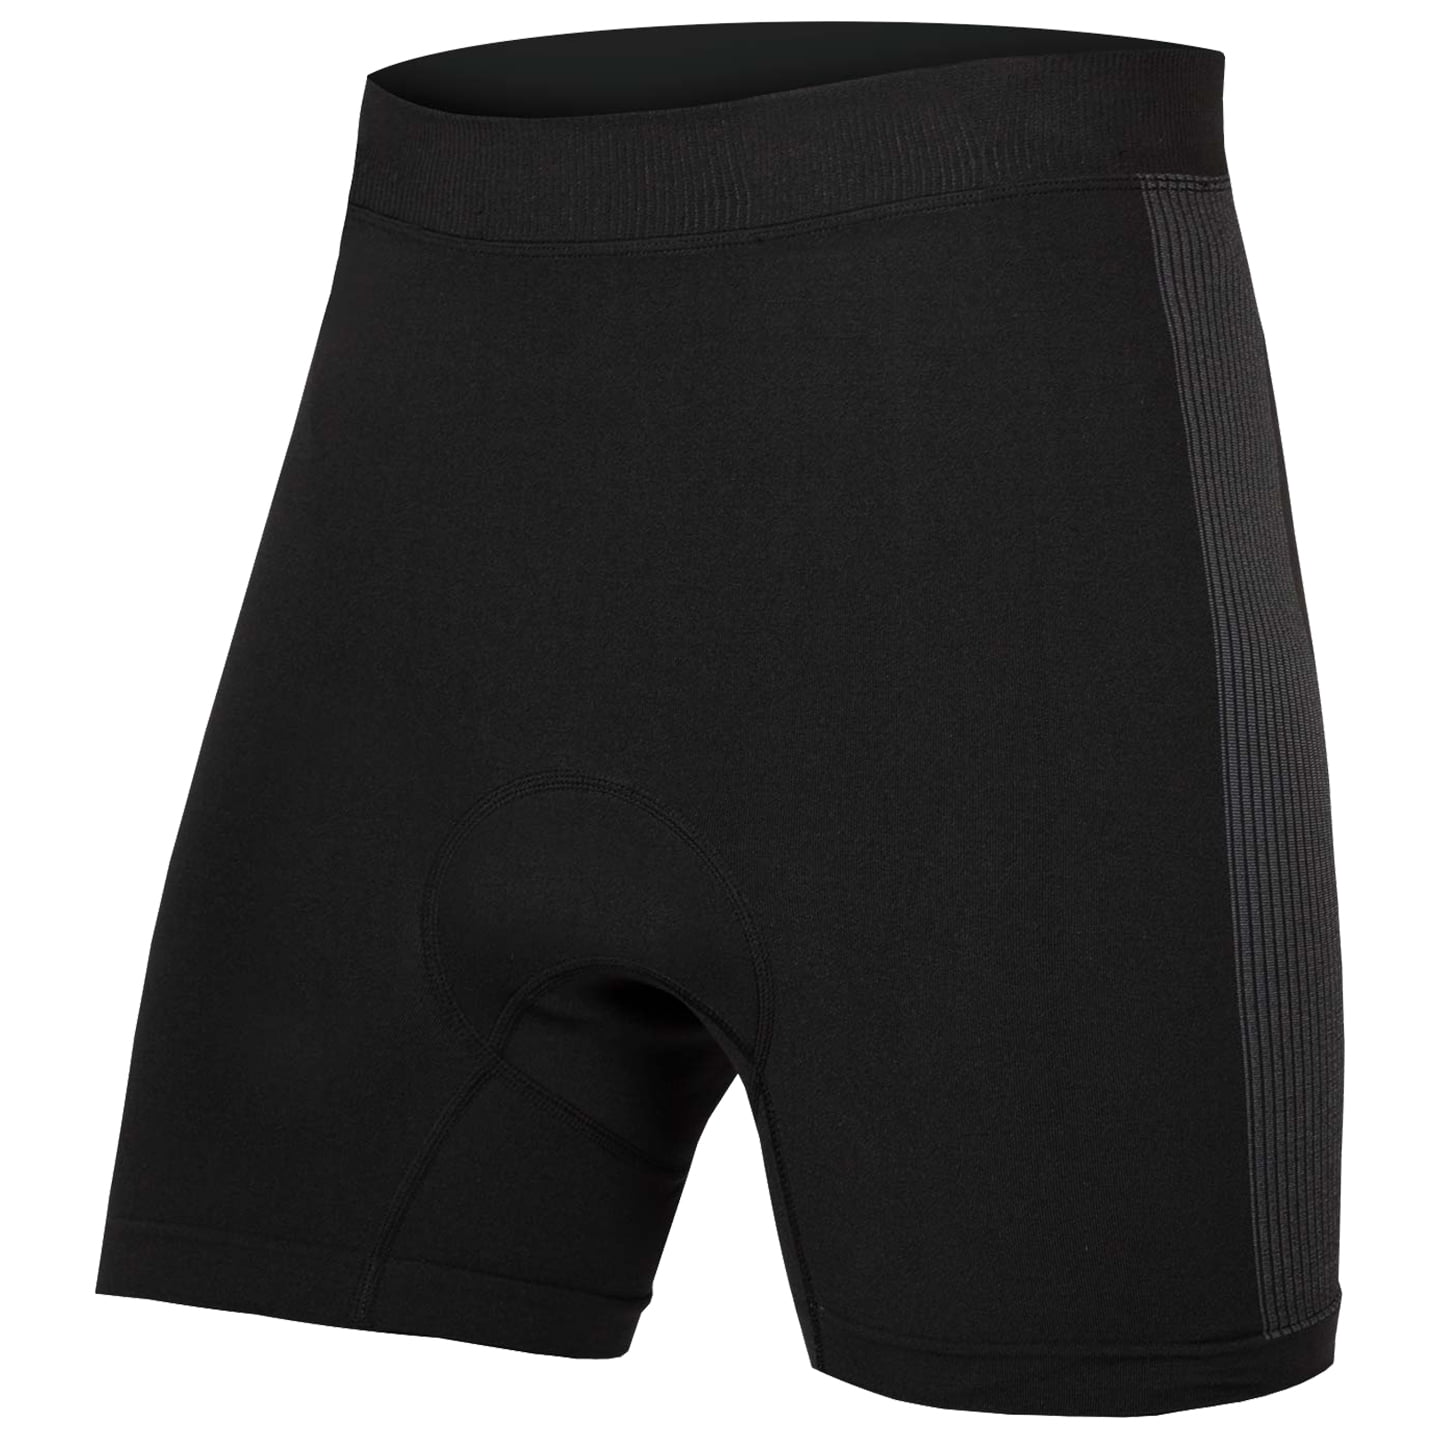 Padded Boxer Shorts, for men, size S, Briefs, Bike gear